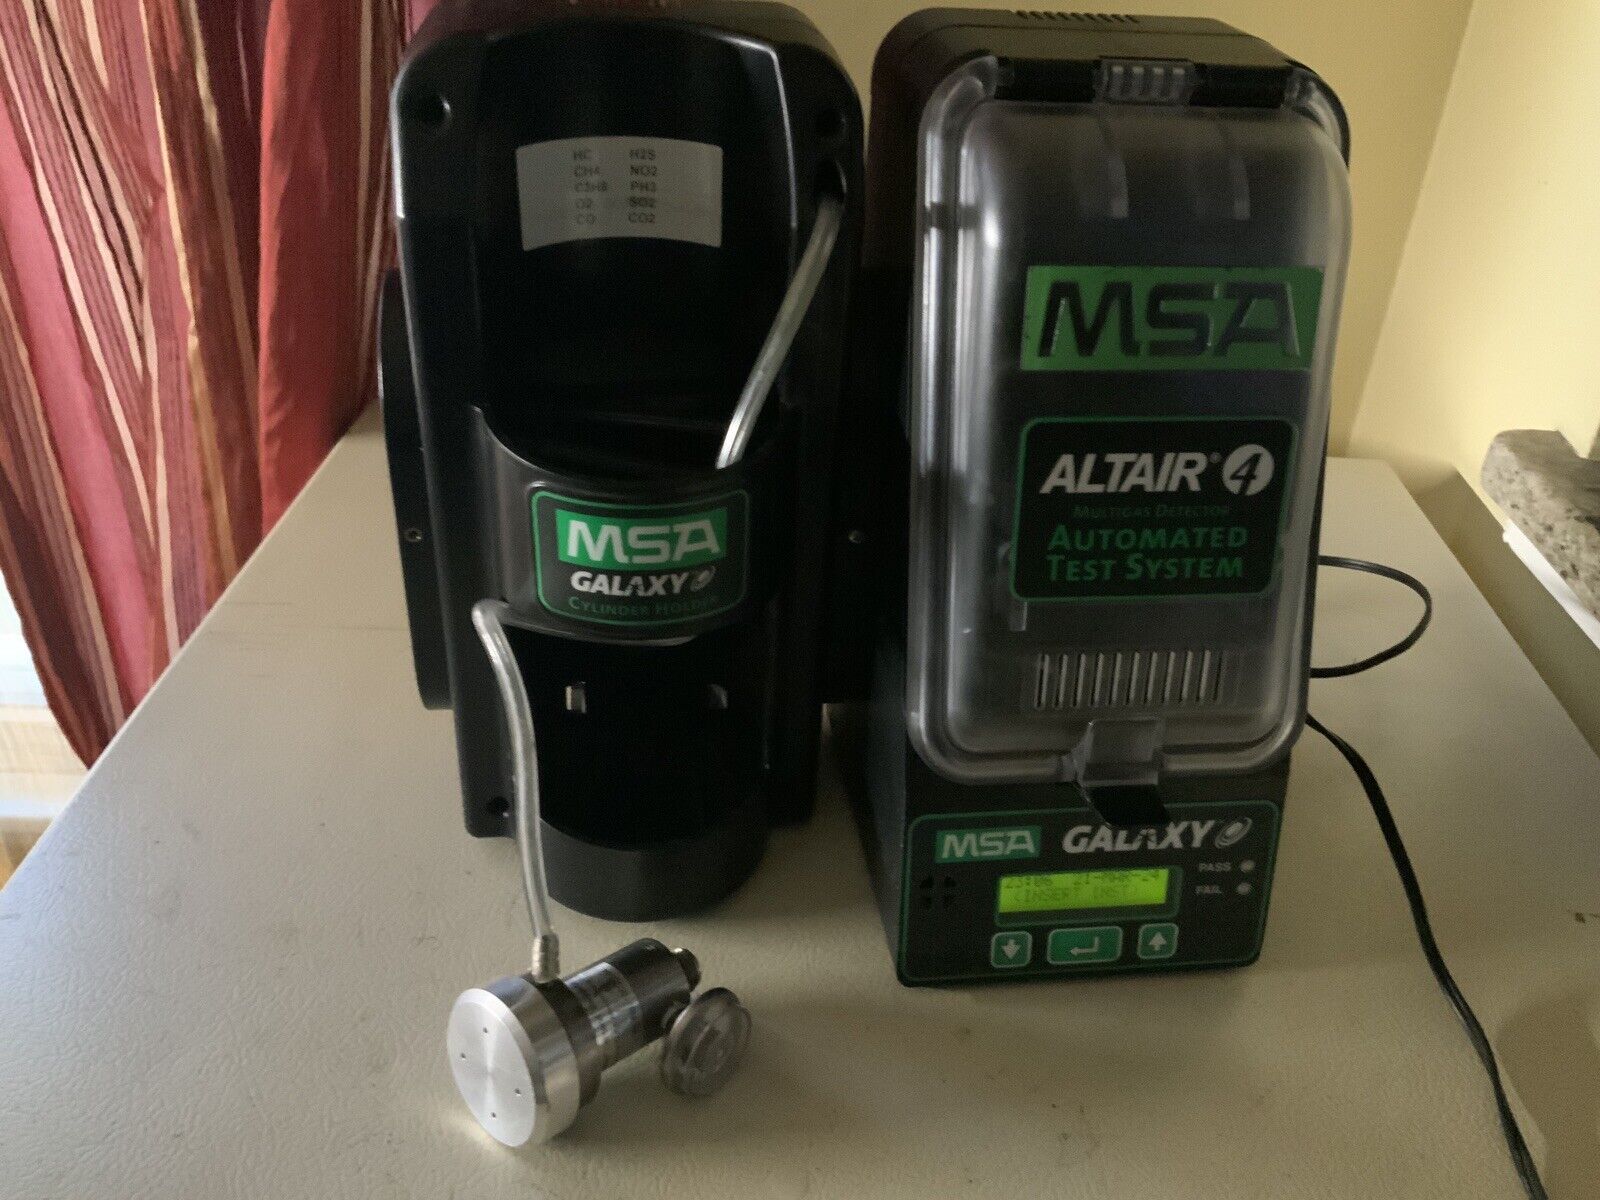 MSA Galaxy Altair 4 Multi Gas Detector Automated Test System Calibration